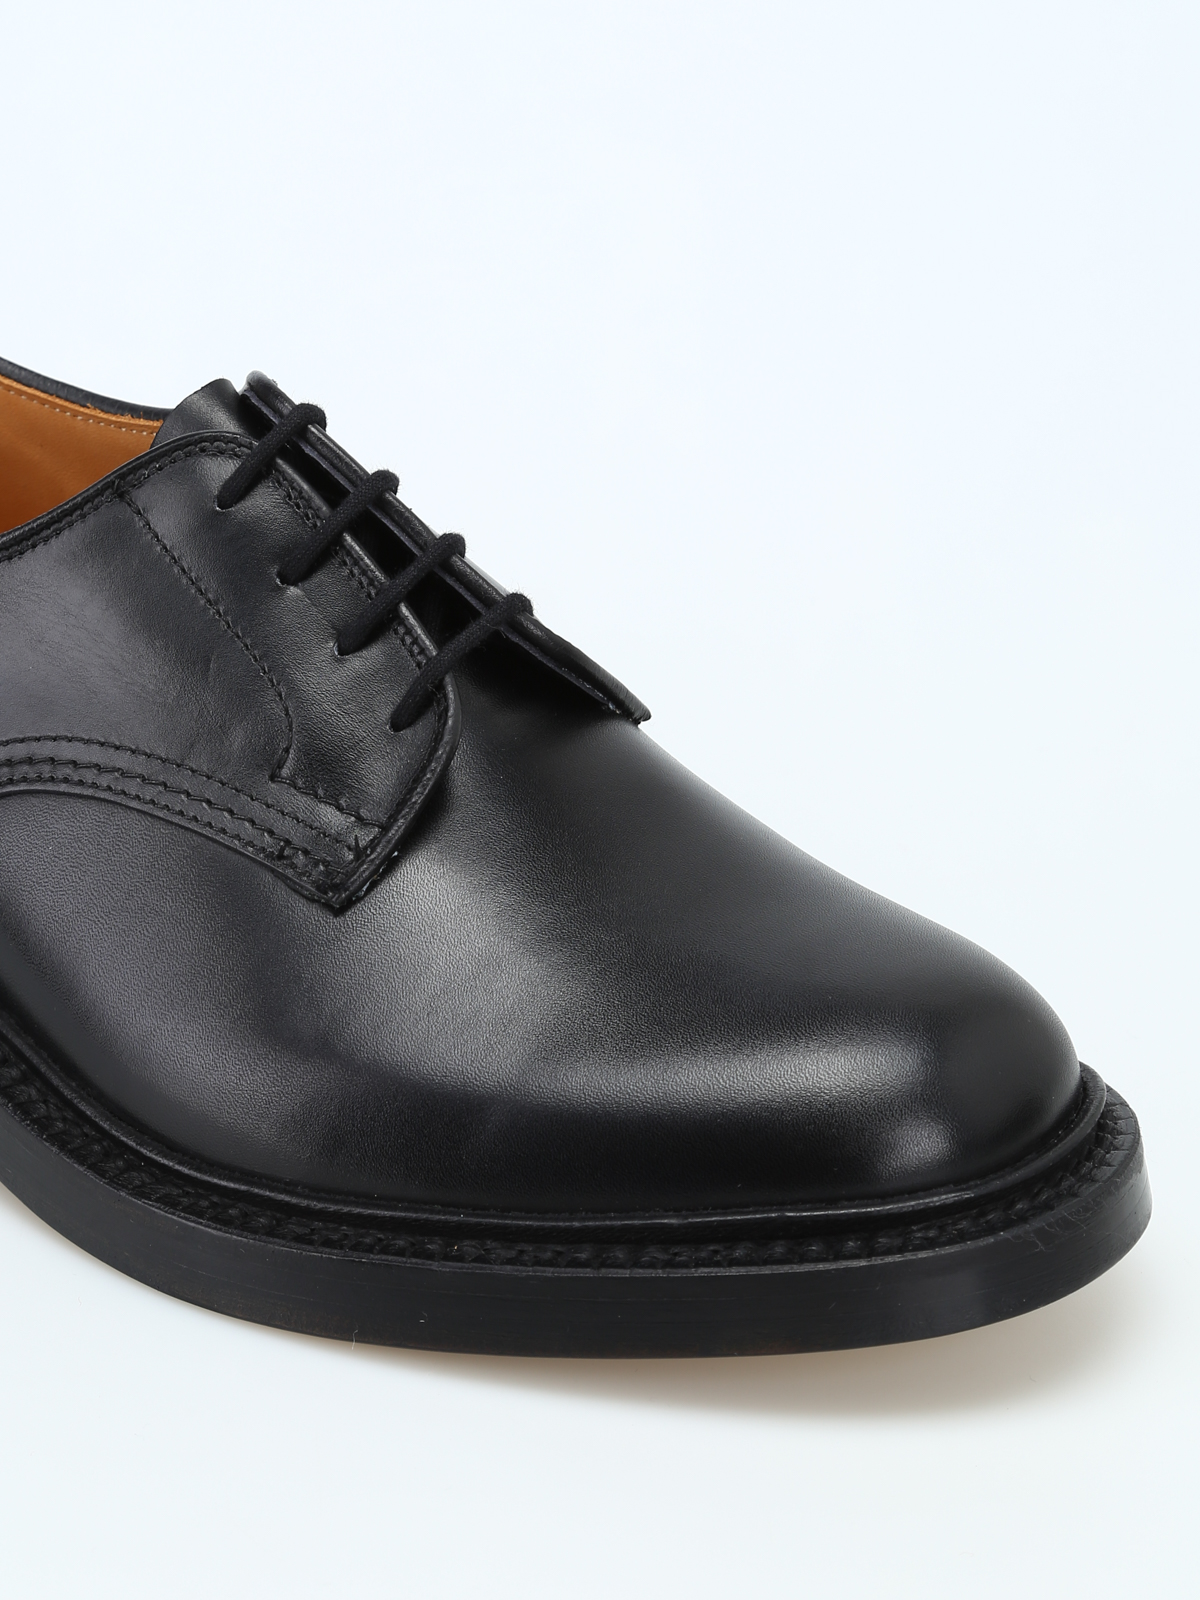 Woodstock black leather Derby shoes 